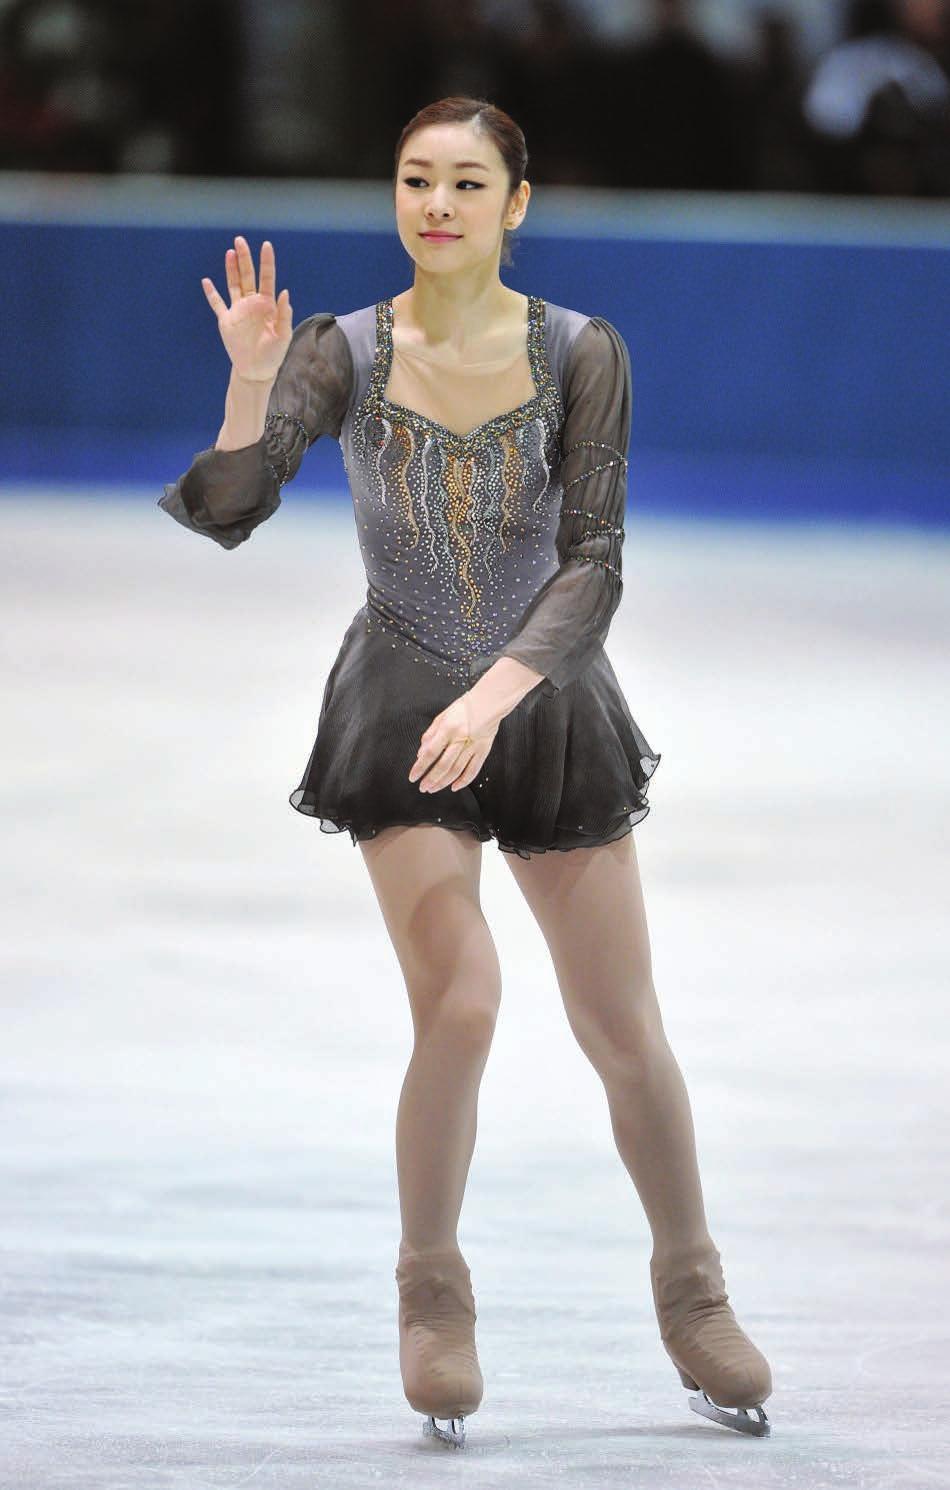 W Story World s Greatest Figure Skater Yuna Kim The 2009 and 2010 world figure skating champion and Olympic Gold Medalist, Yuna, become the new